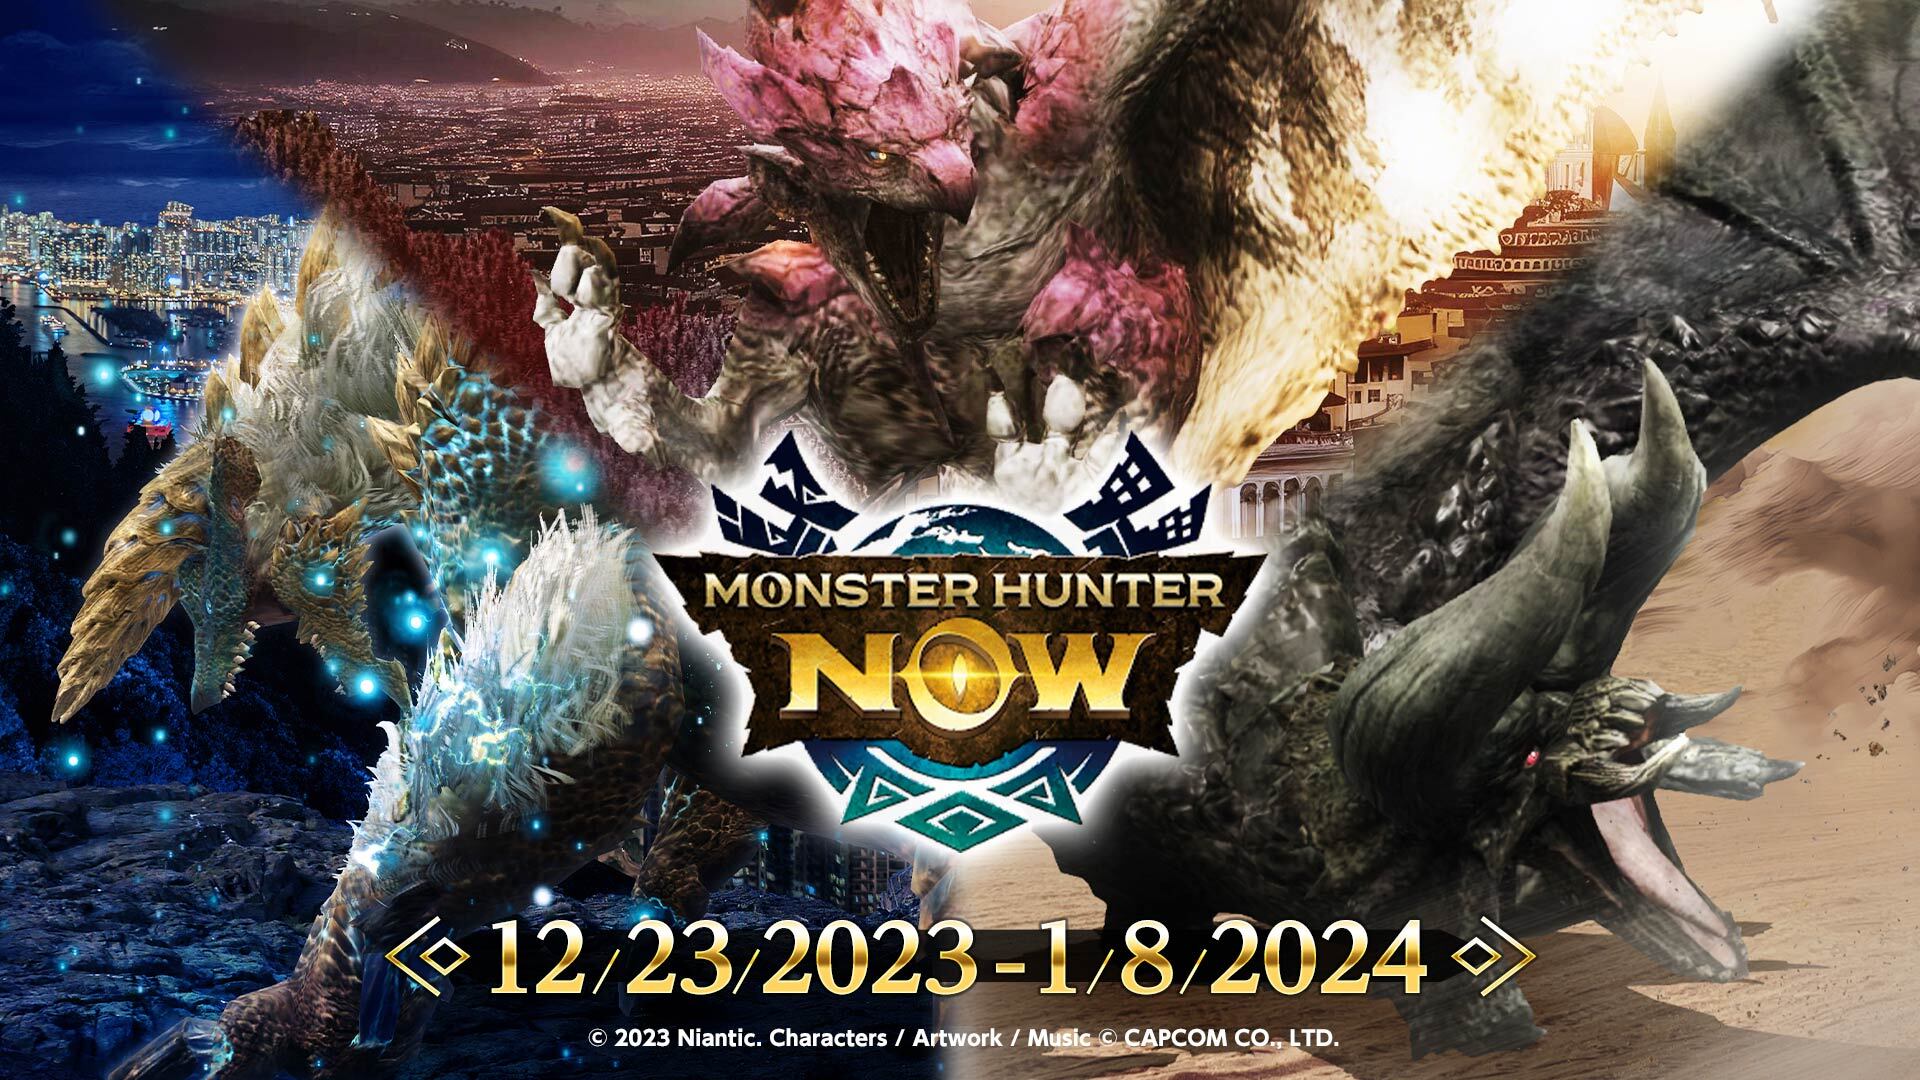 Who Was This Weekend's Monster Hunter Now Diablos Event Even For?